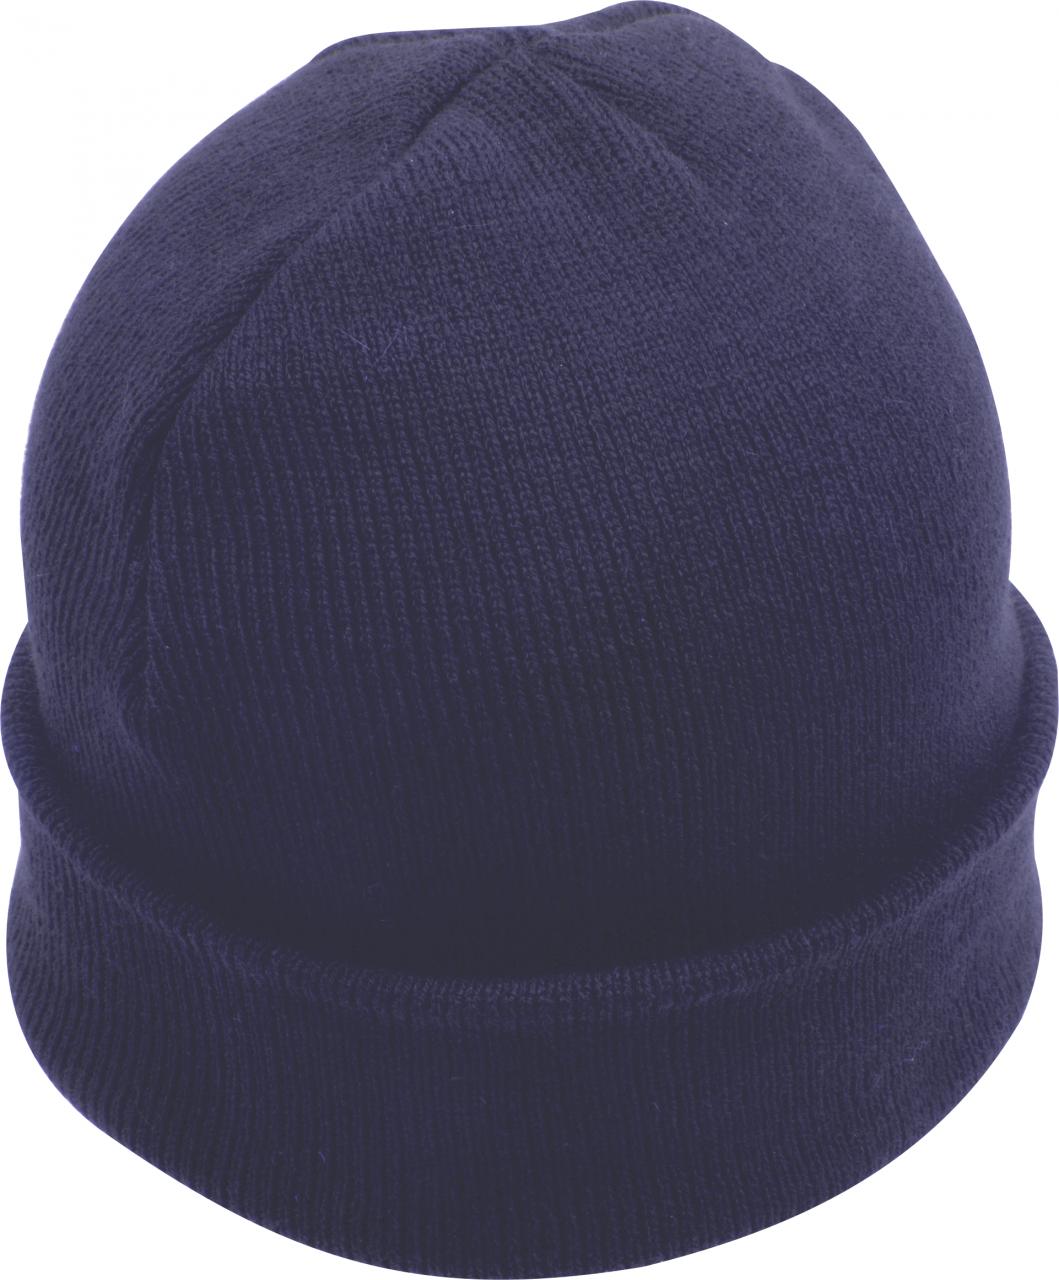 Security Beanies. Avail in Black or Navy